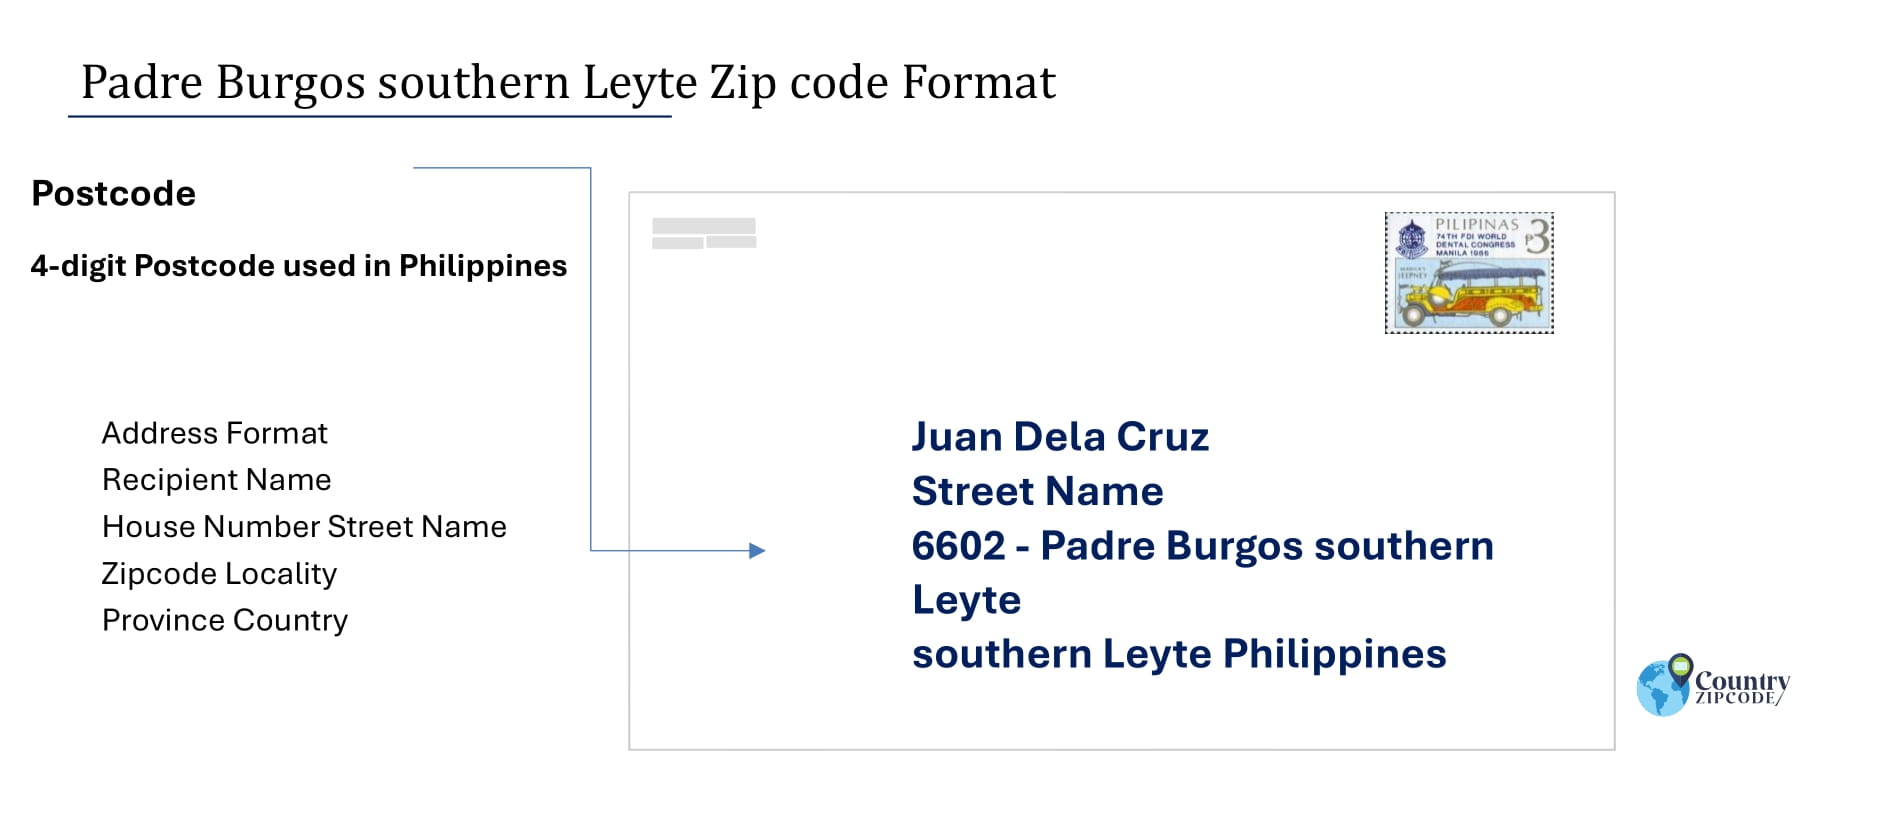 example of Padre Burgos southern Leyte Philippines zip code and address format